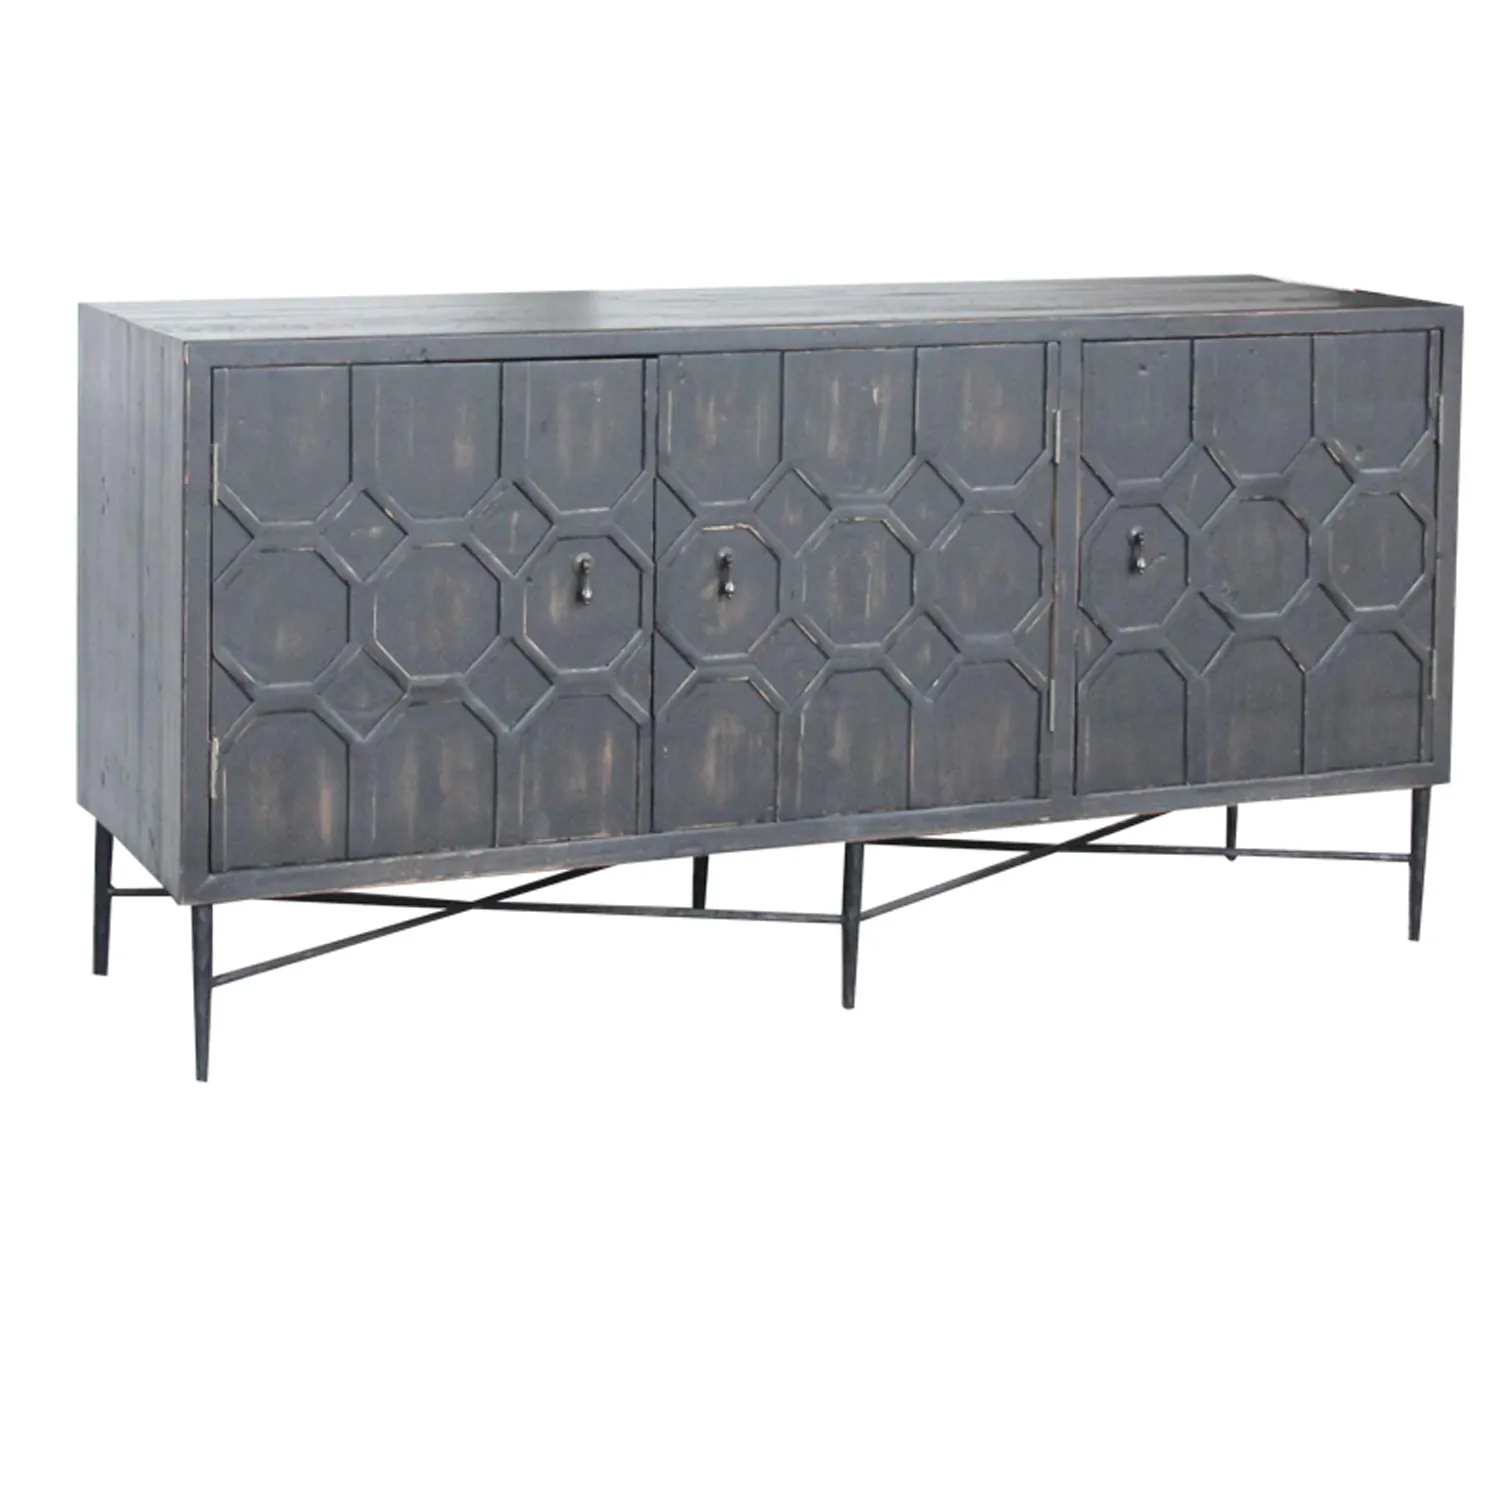 Unique rustic eco-friendly recycled fir iron sideboard